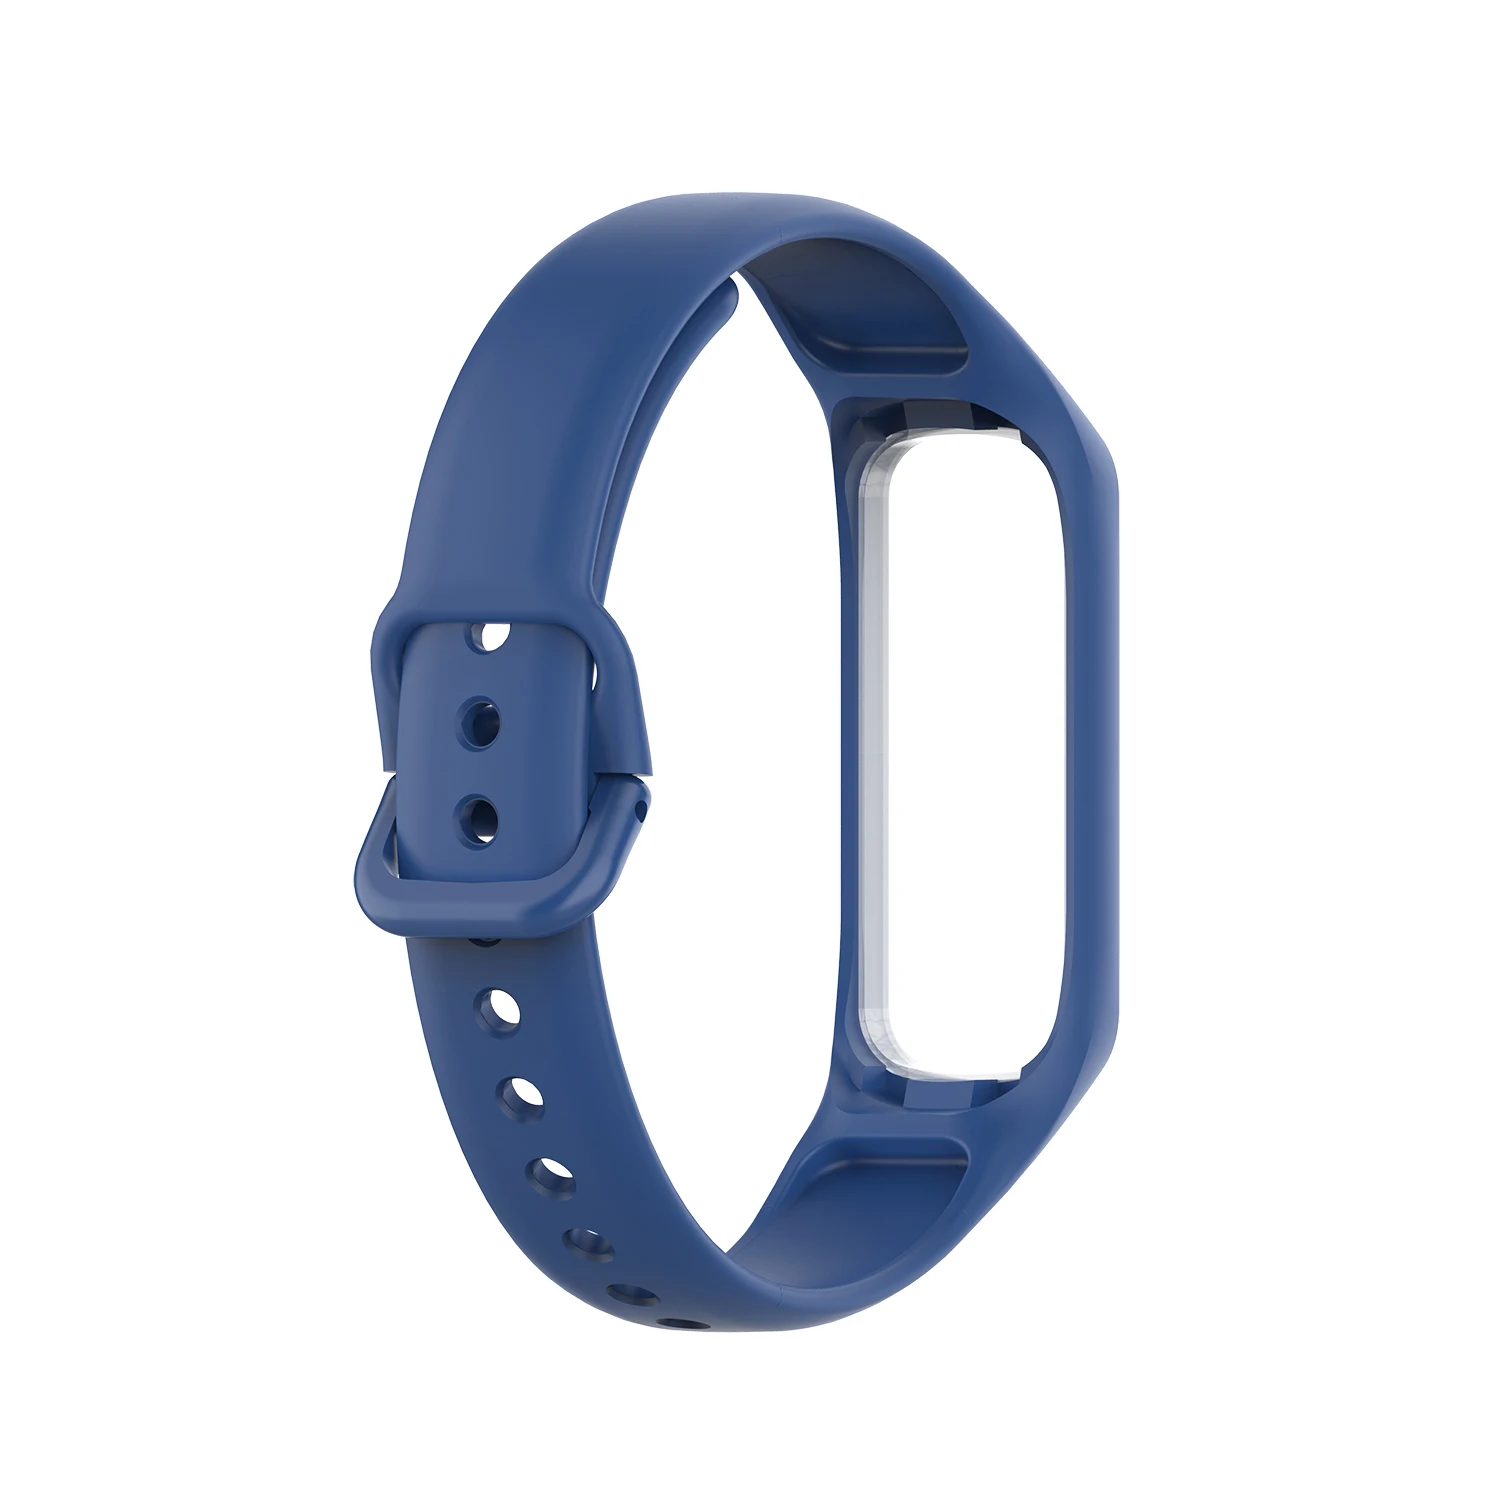 

Smart Silicone Watch Bands Wristband for Samsung Galaxy Fit 2 (SM-R220) Watch Bracelets Strap Band